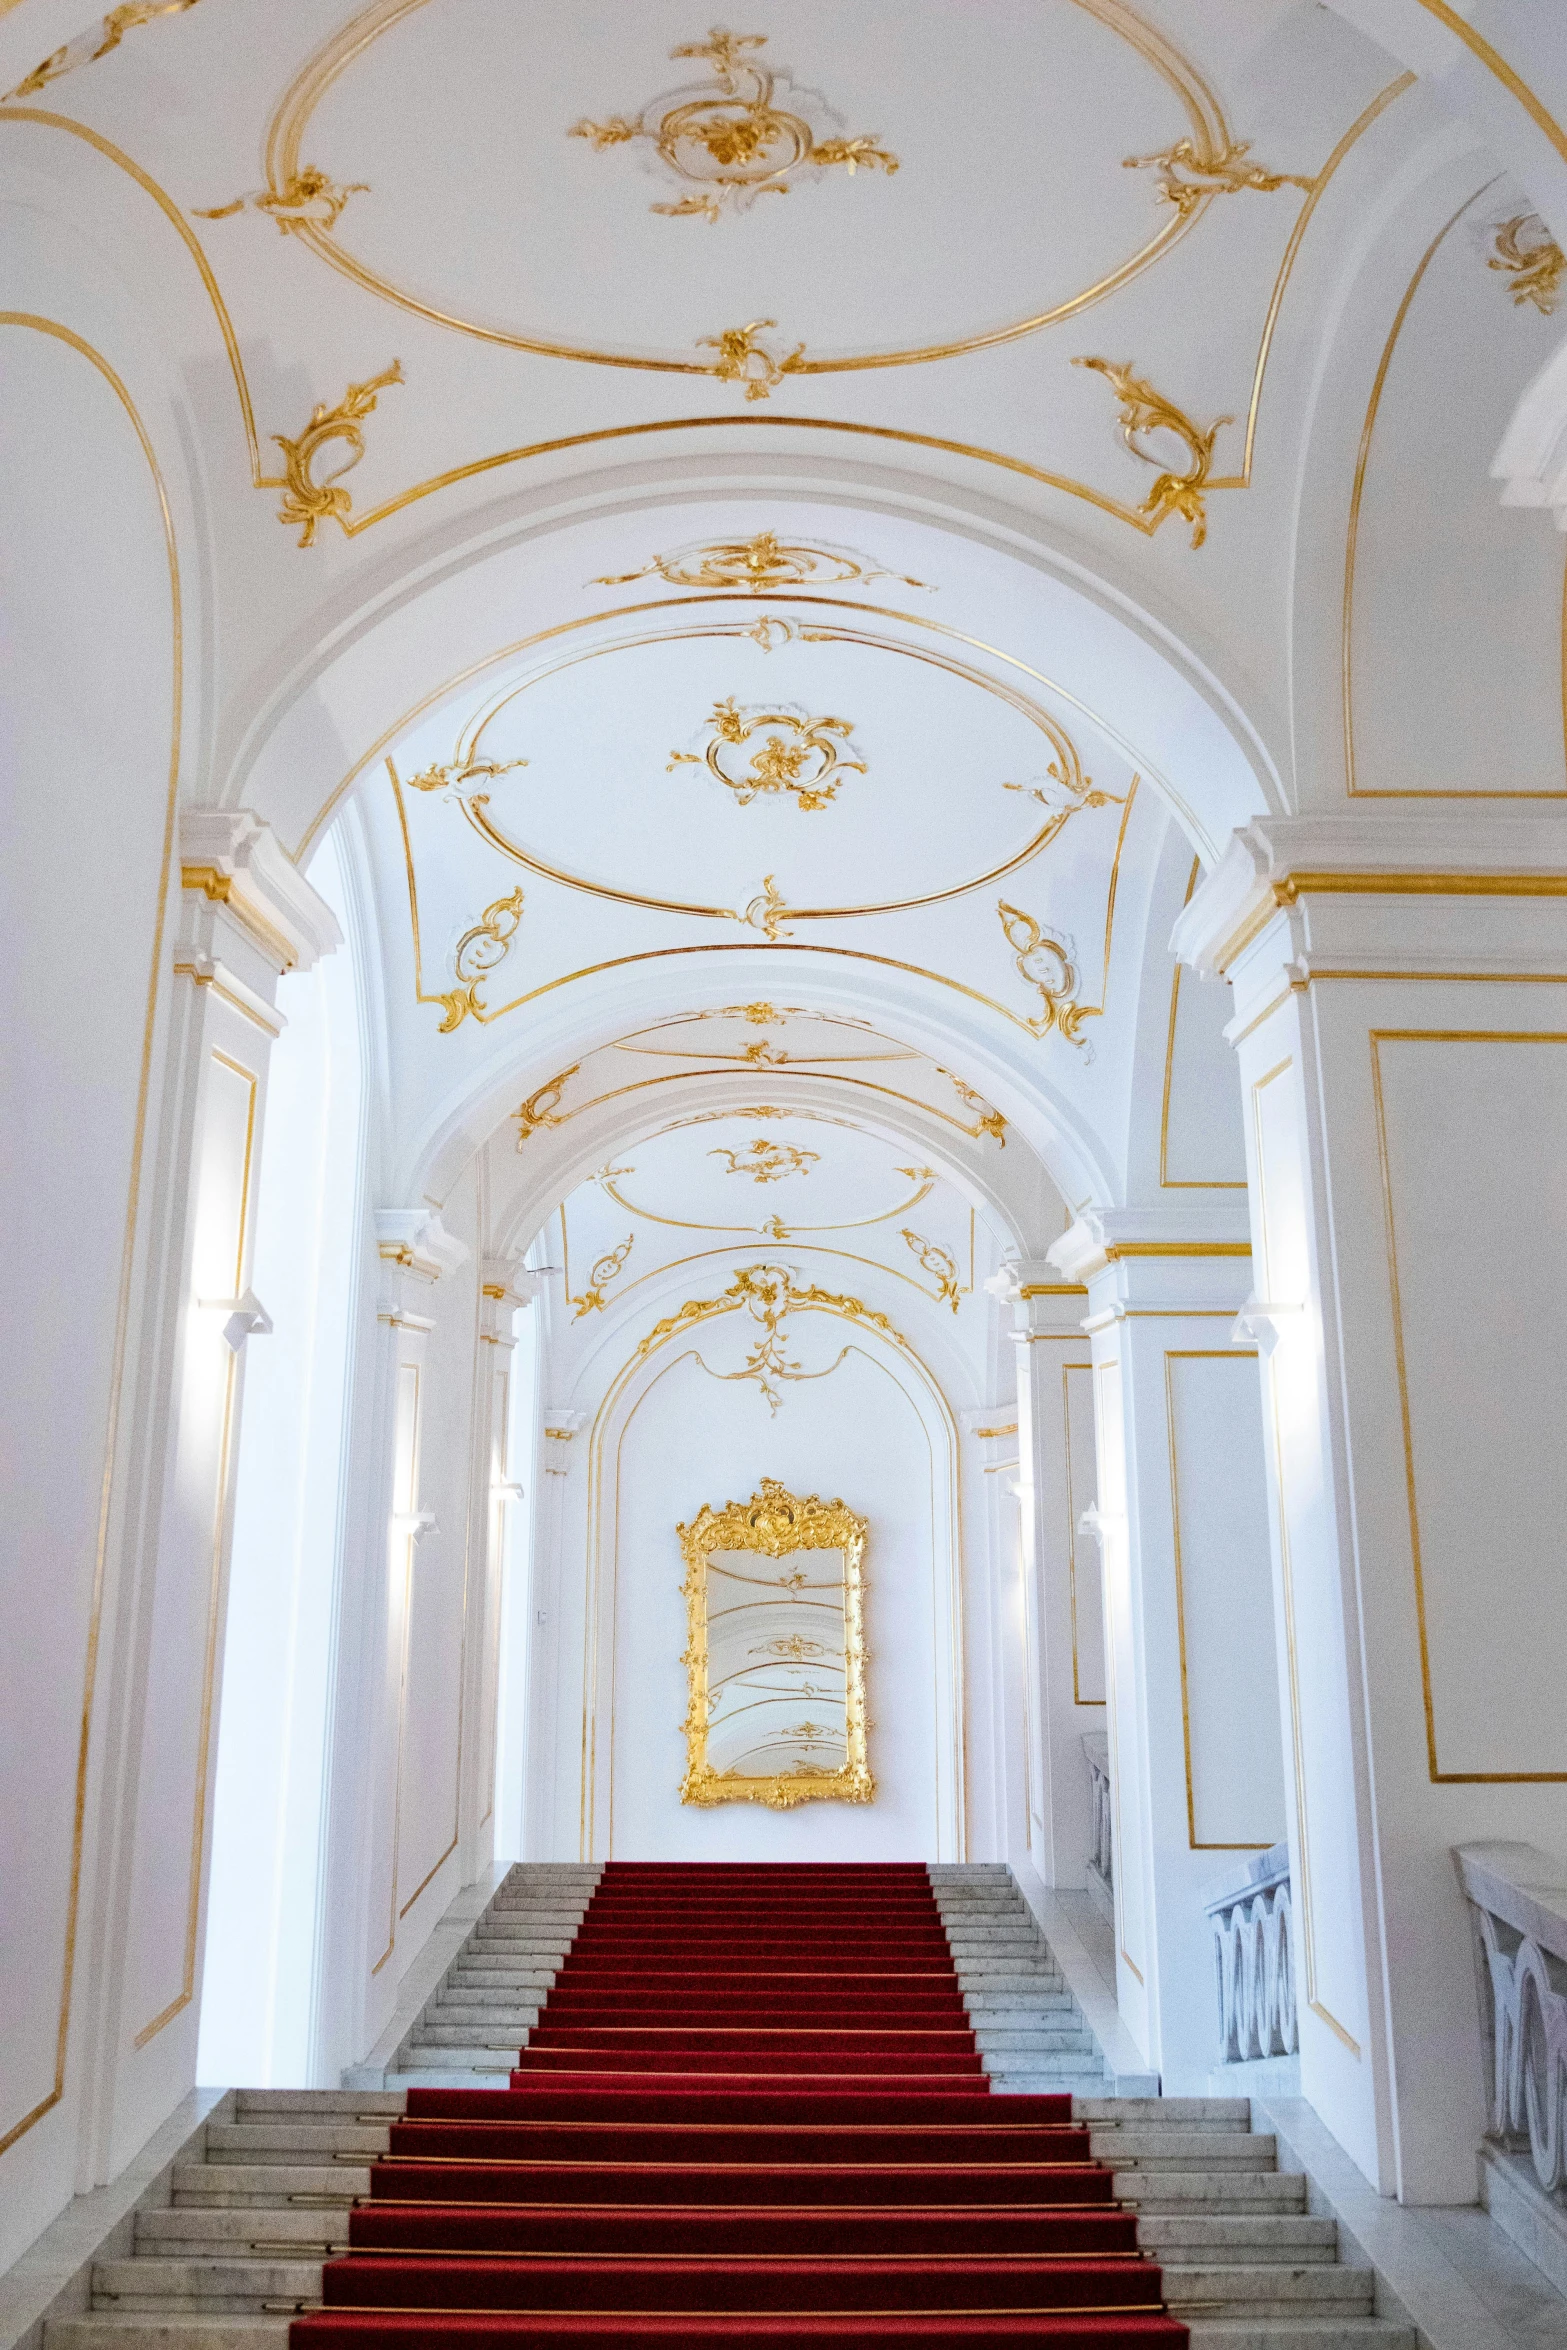 several steps leading up to an archway and golden ceiling